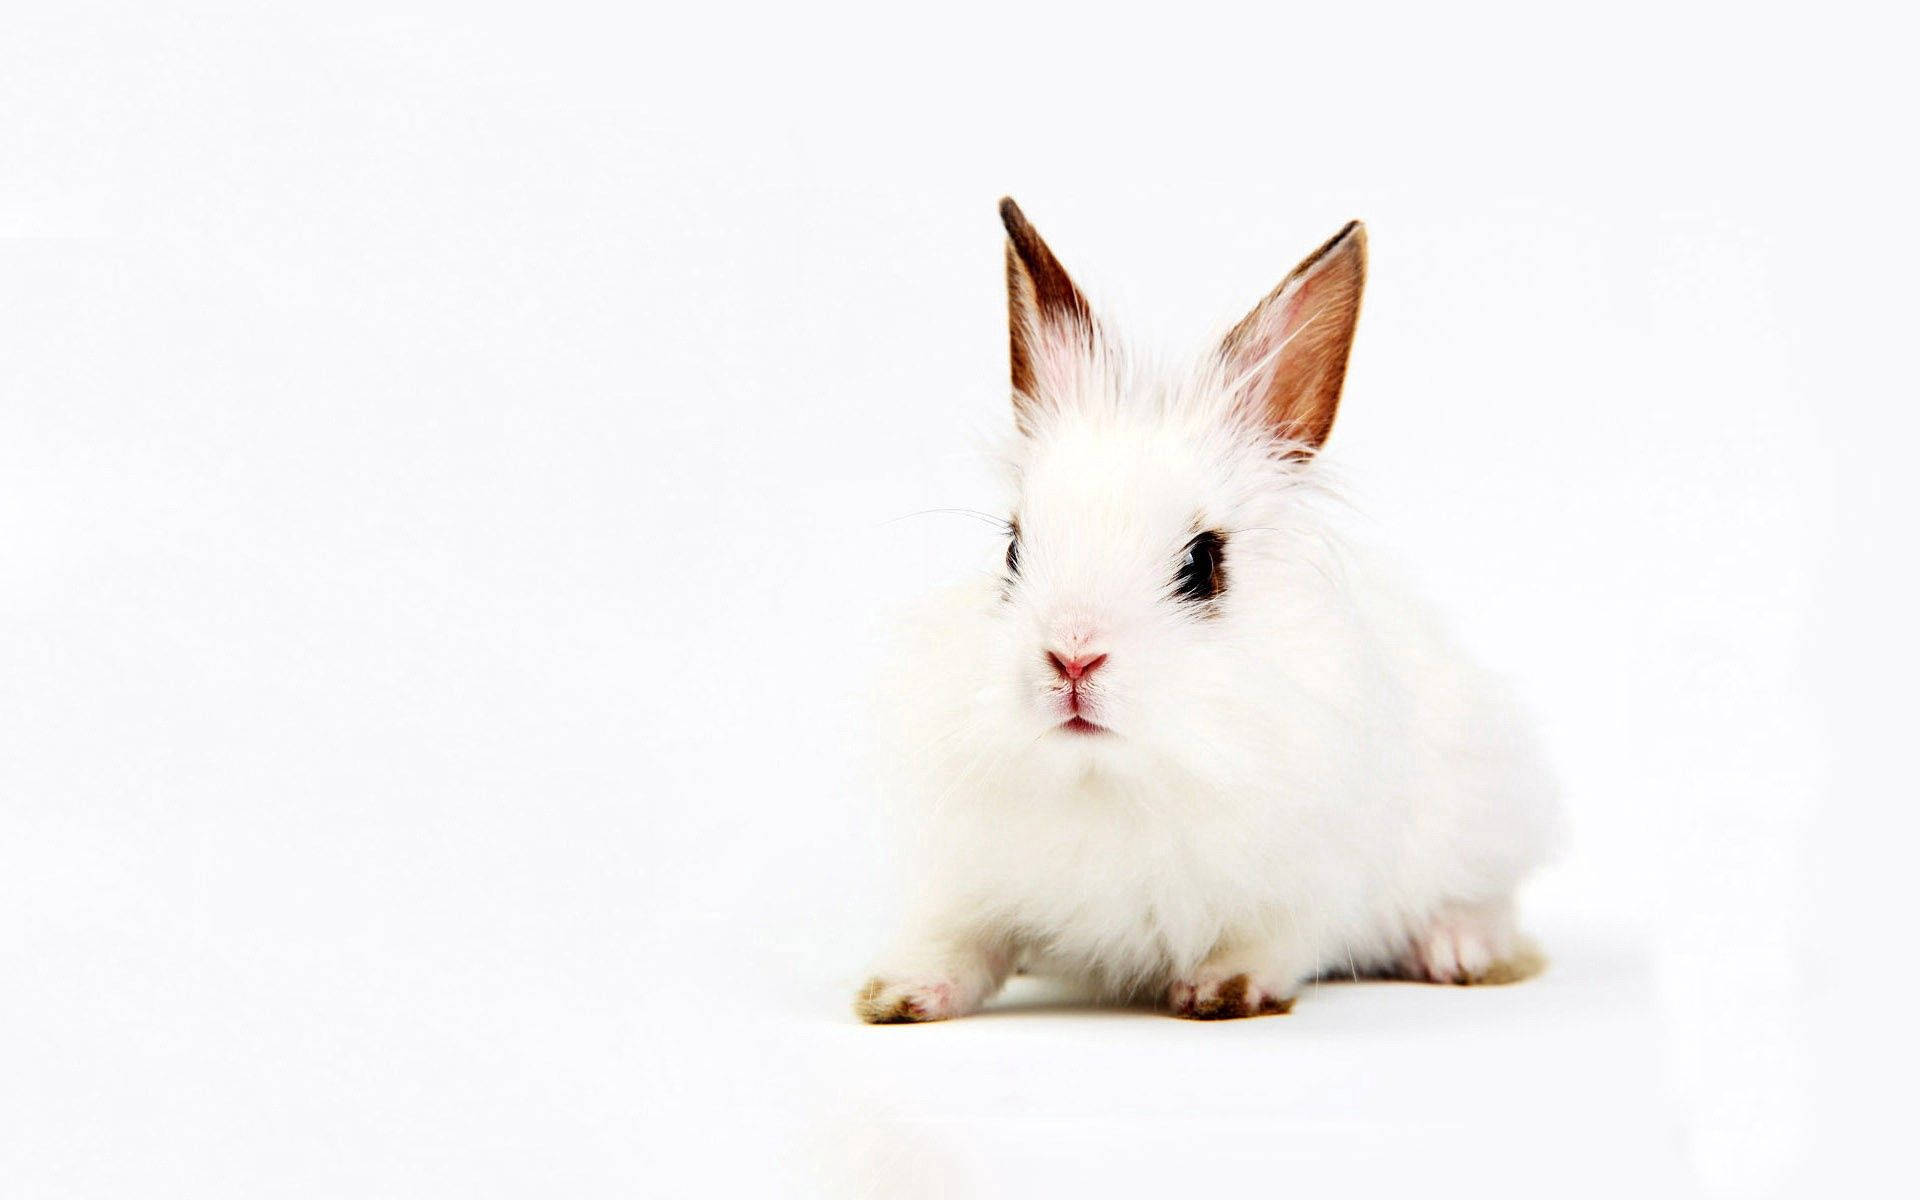 White Bunny Wallpapers